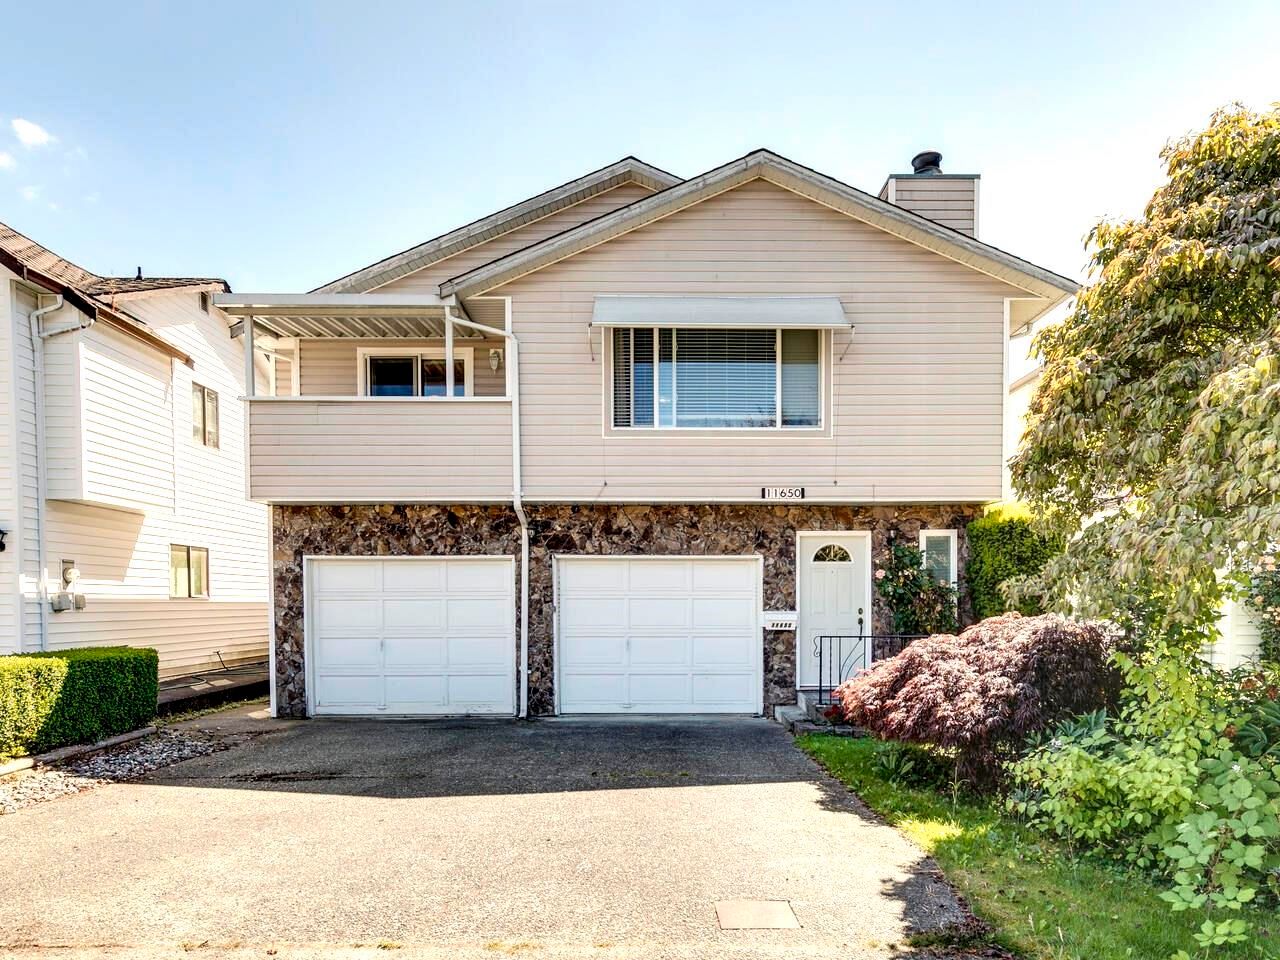 Open House on Saturday, September 17, 2022 12:00PM - 2:00PM
This truly is the home that serious Buyers hope to find.  Already one of the more affordable homes for sale in Maple Ridge, you'll love that the home has been gently lived in, is almost spotless,